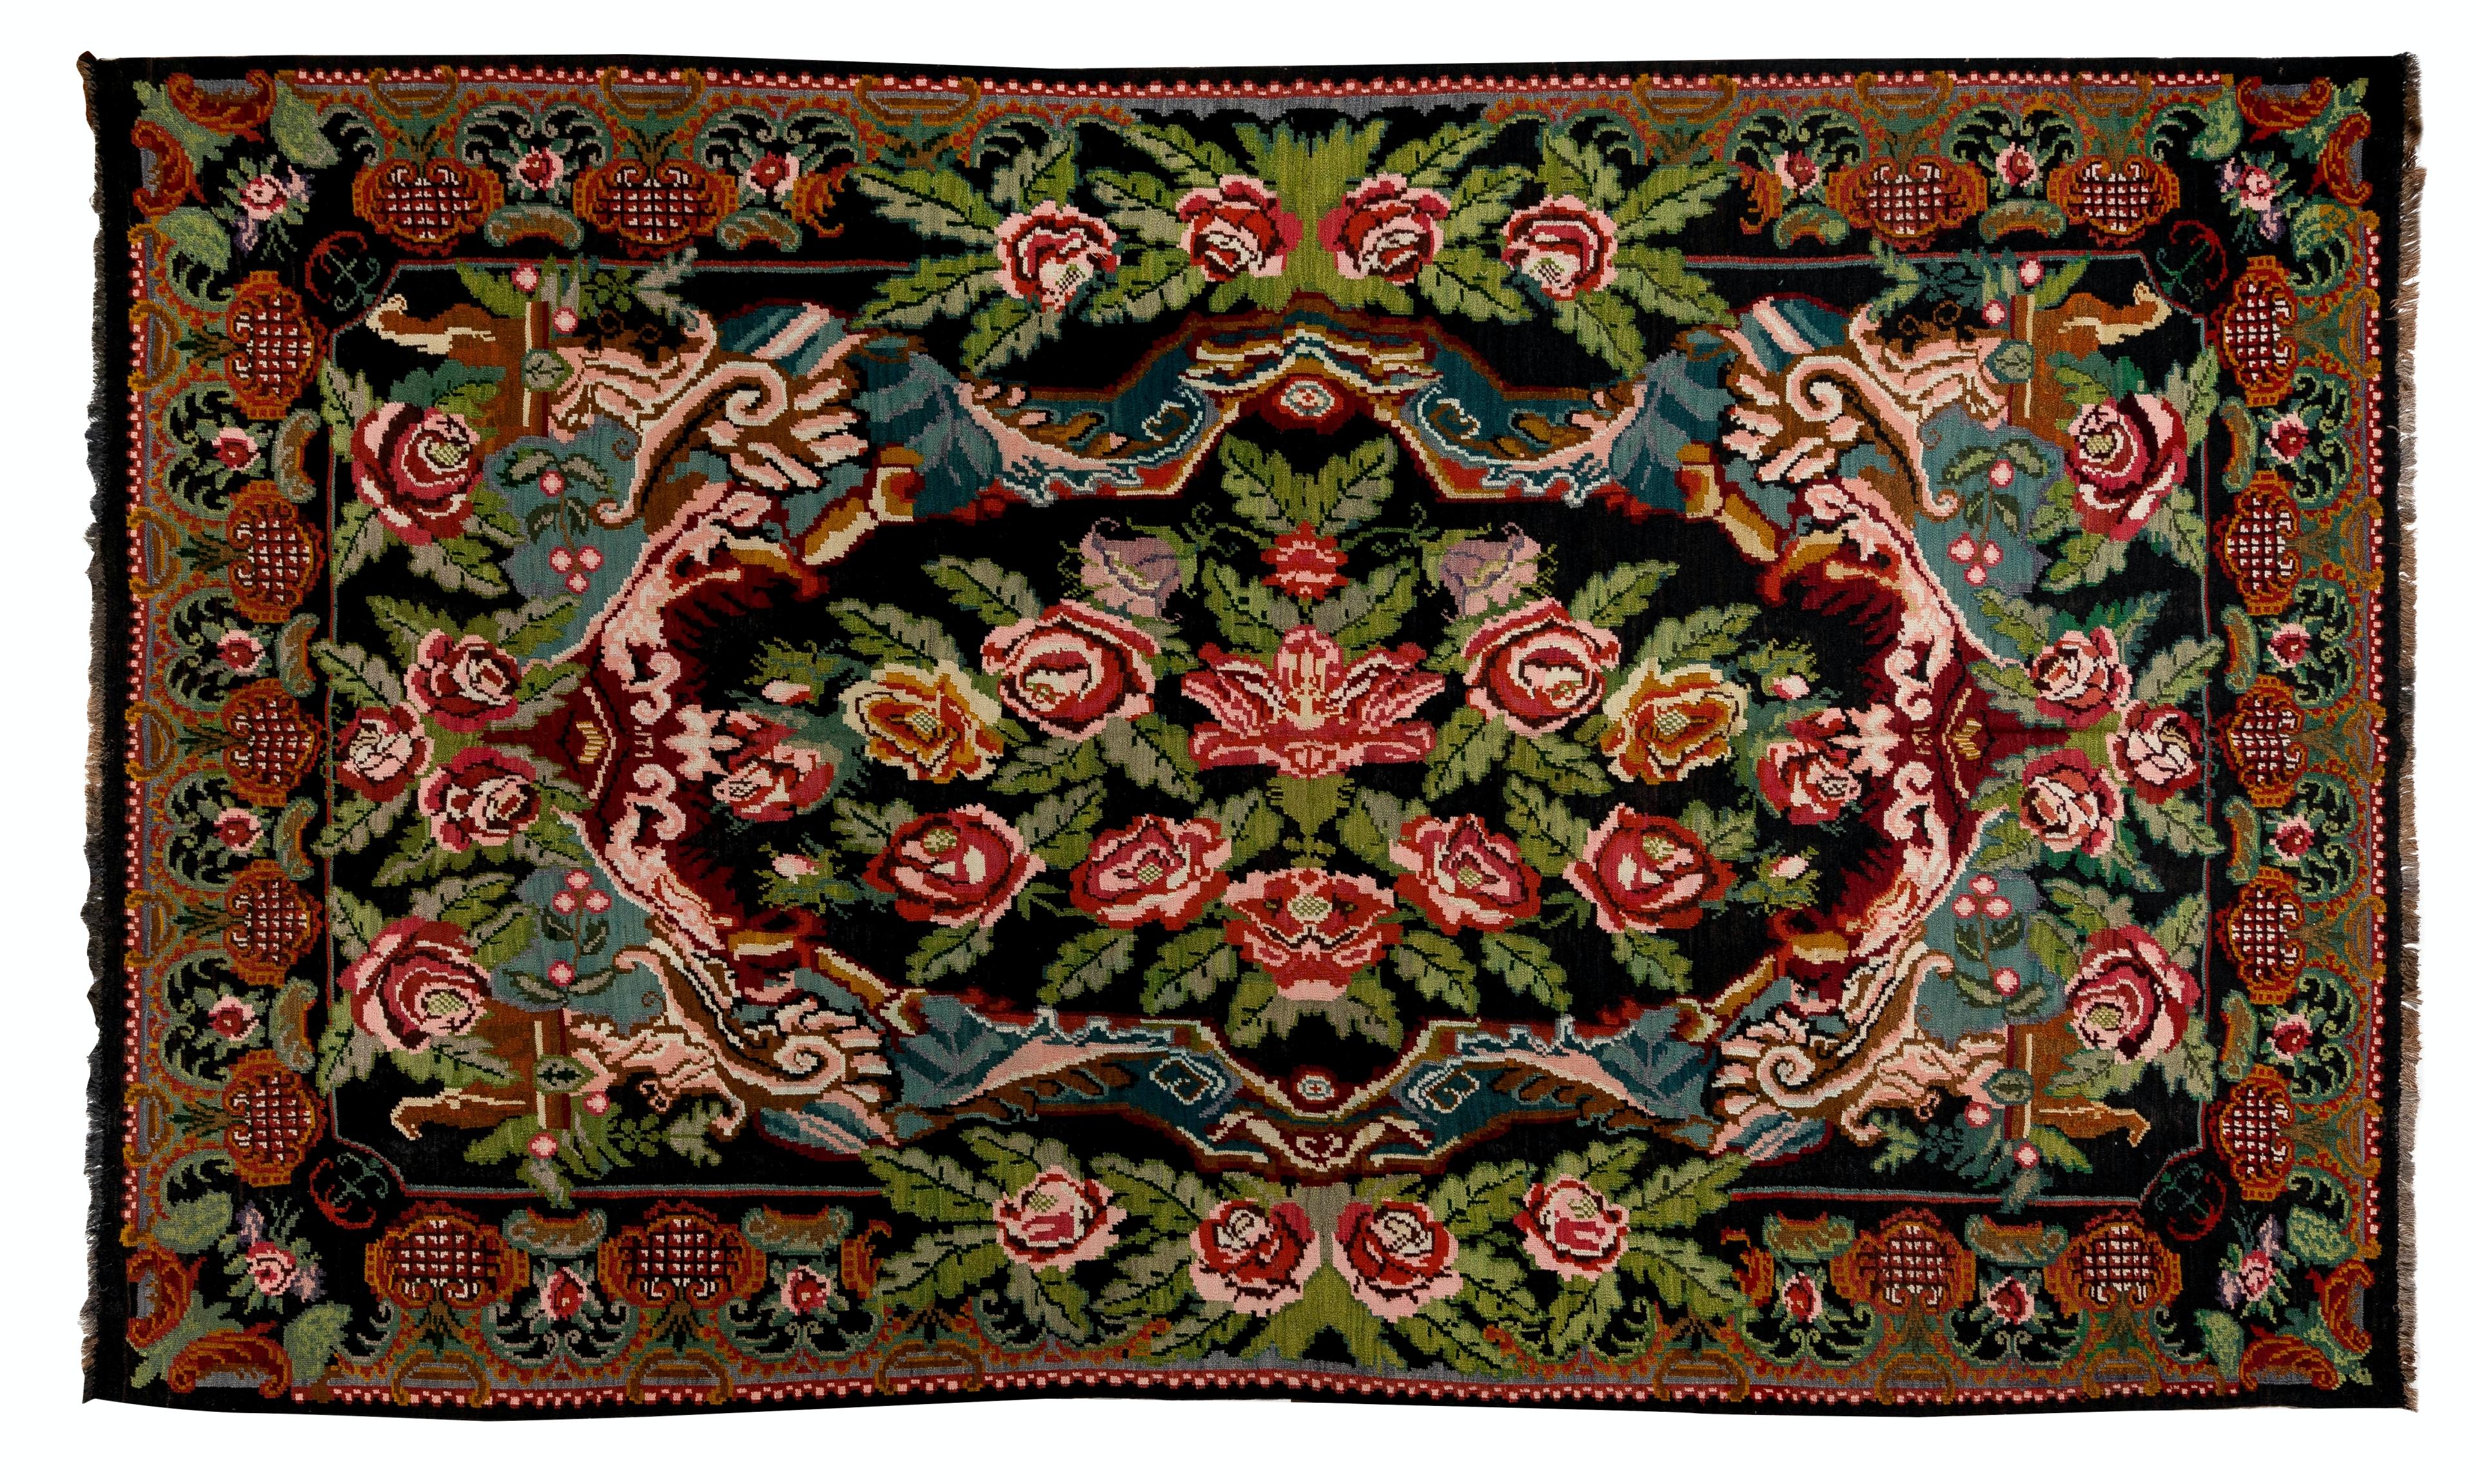 Hand-Woven 7.8x12.7 Ft Vintage Bessarabian Kilim. Handmade Floral Wool Rug from Moldova For Sale